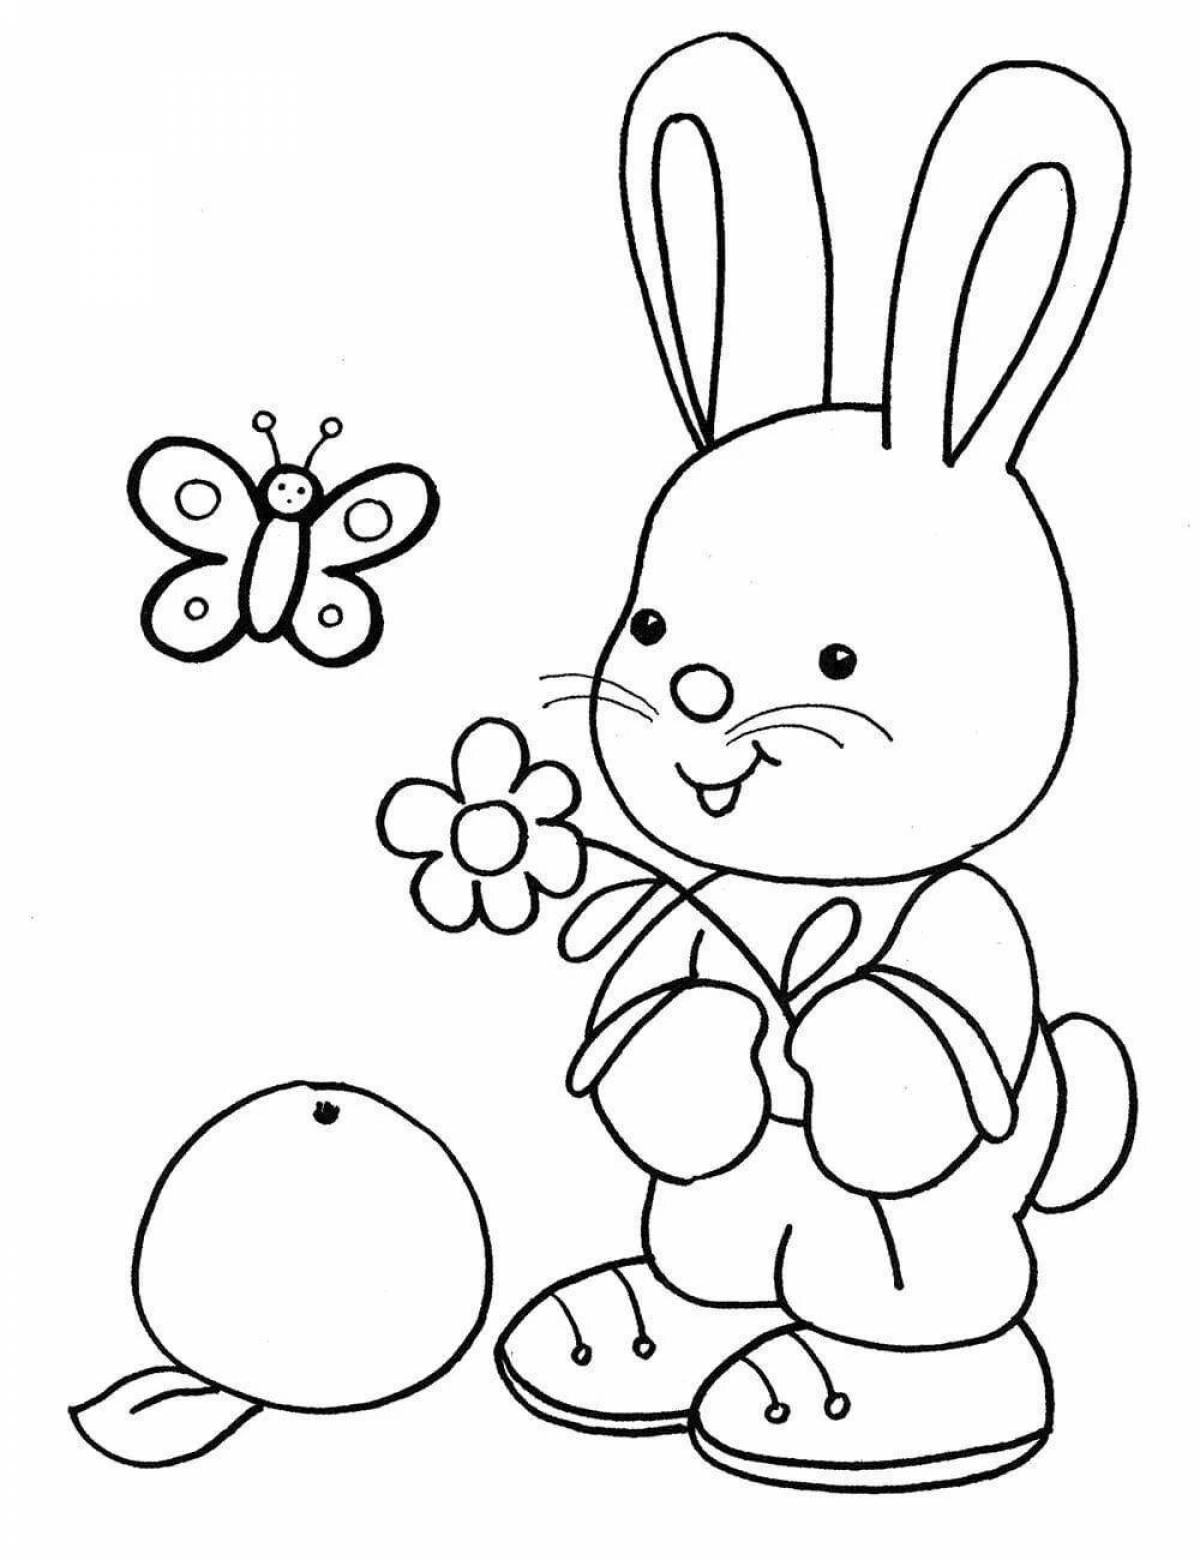 Outstanding coloring book for 4 year olds